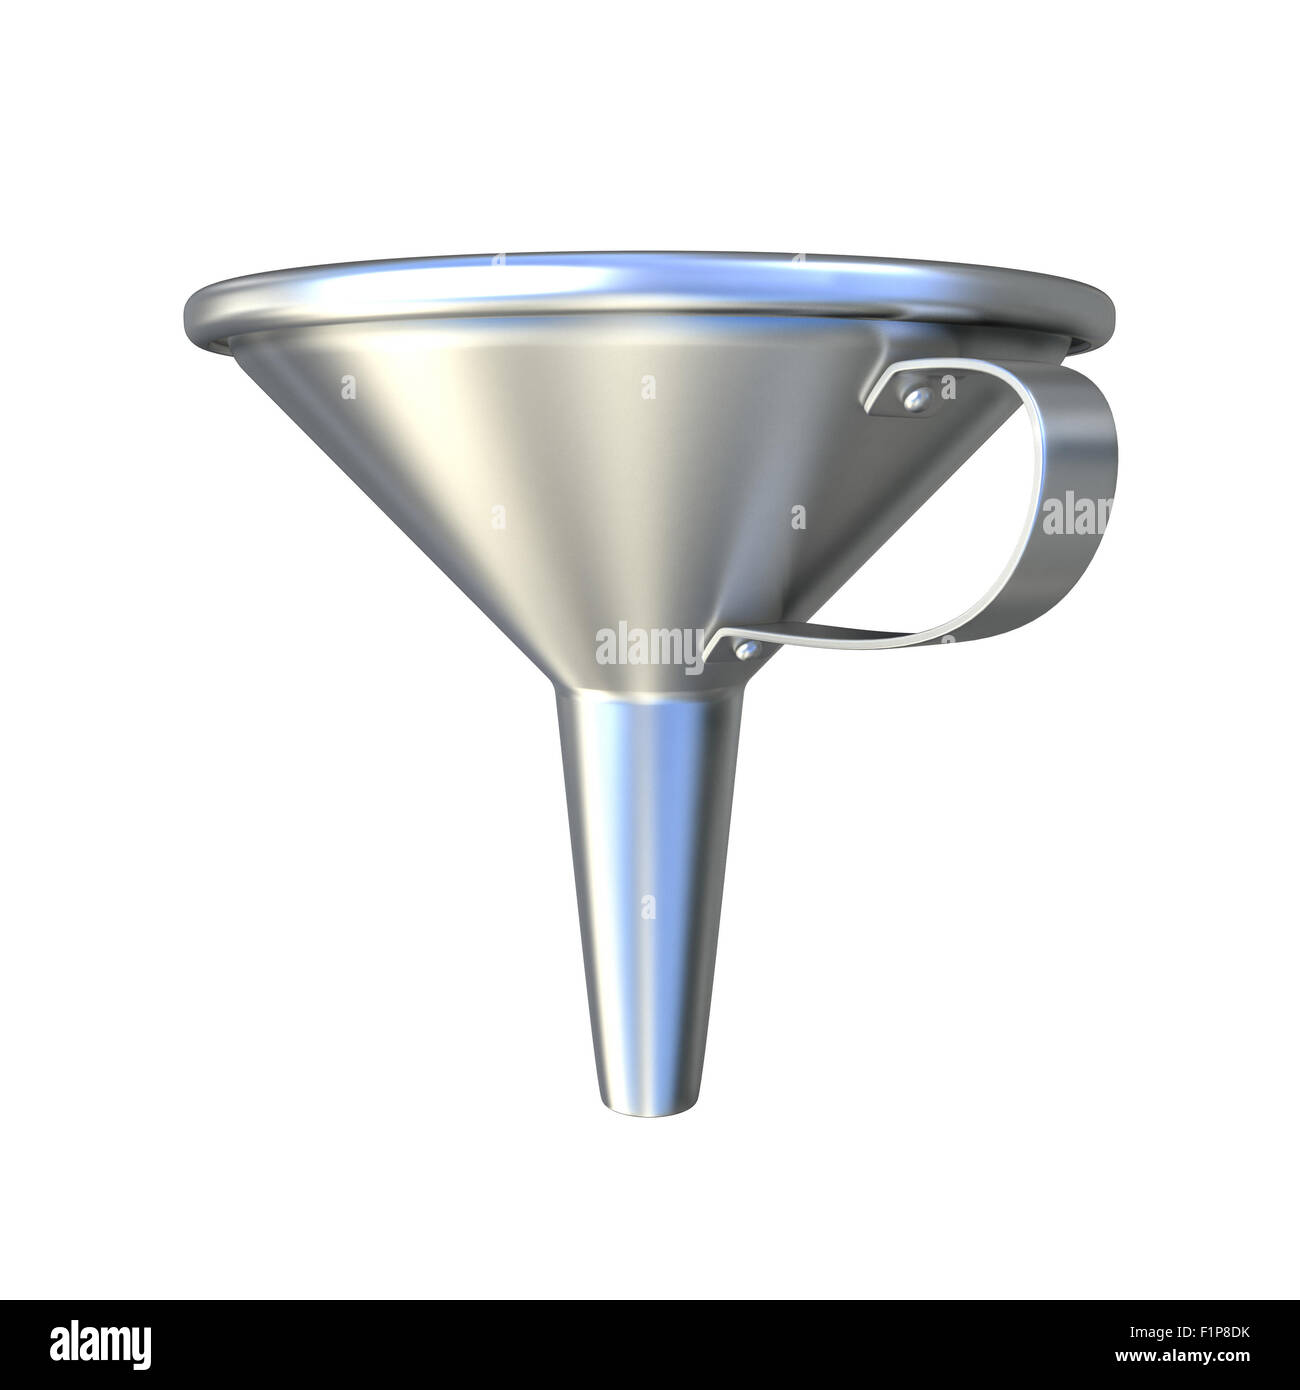 Steel funnel. 3D render illustration, isolated on white. Side view Stock Photo